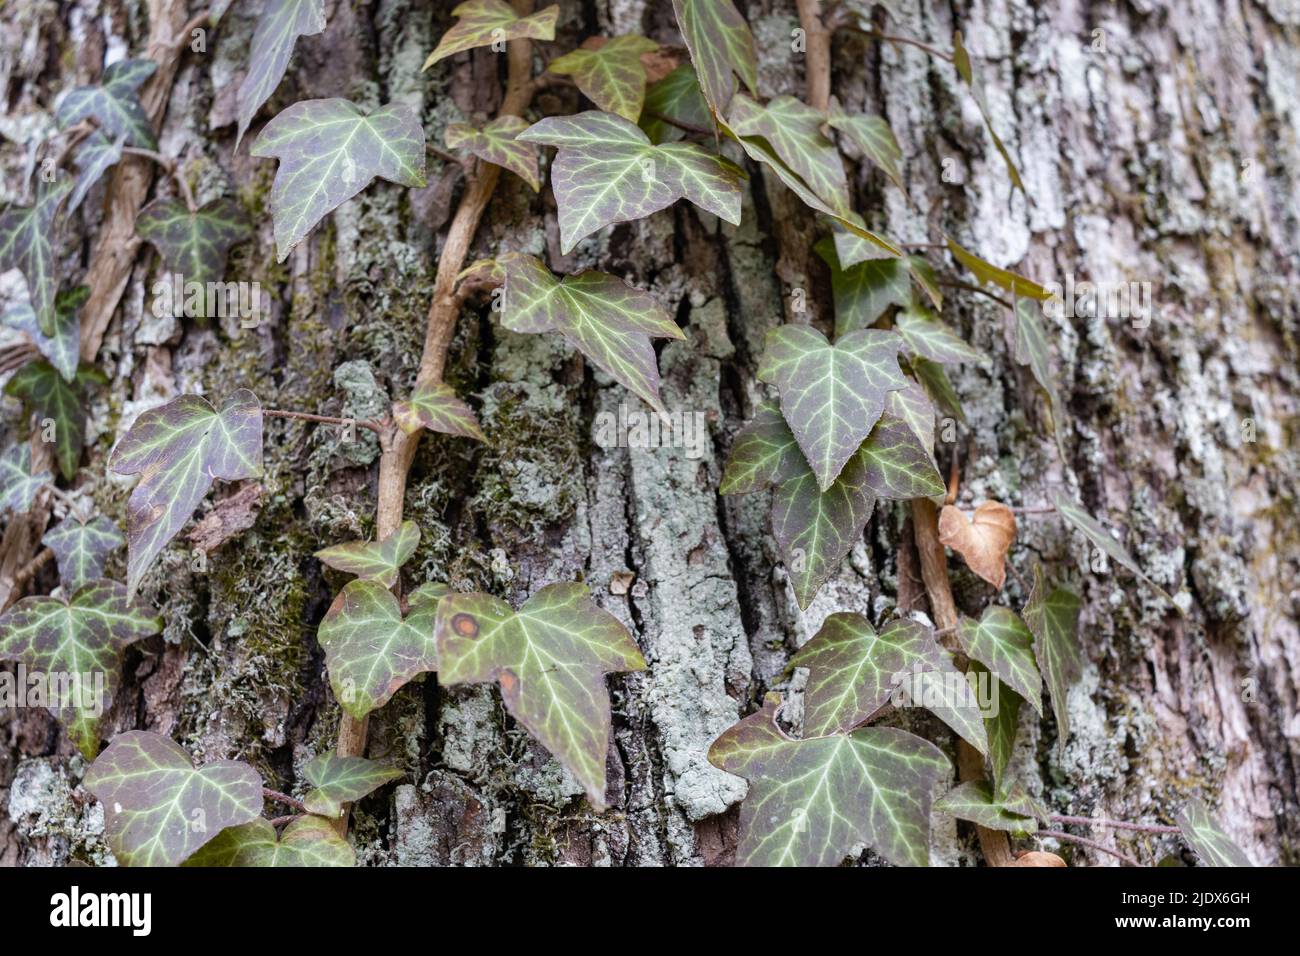 Ivy roots on tree trunk. Hedera helix or European ivy climbing on bark of a tree. Close up Stock Photo